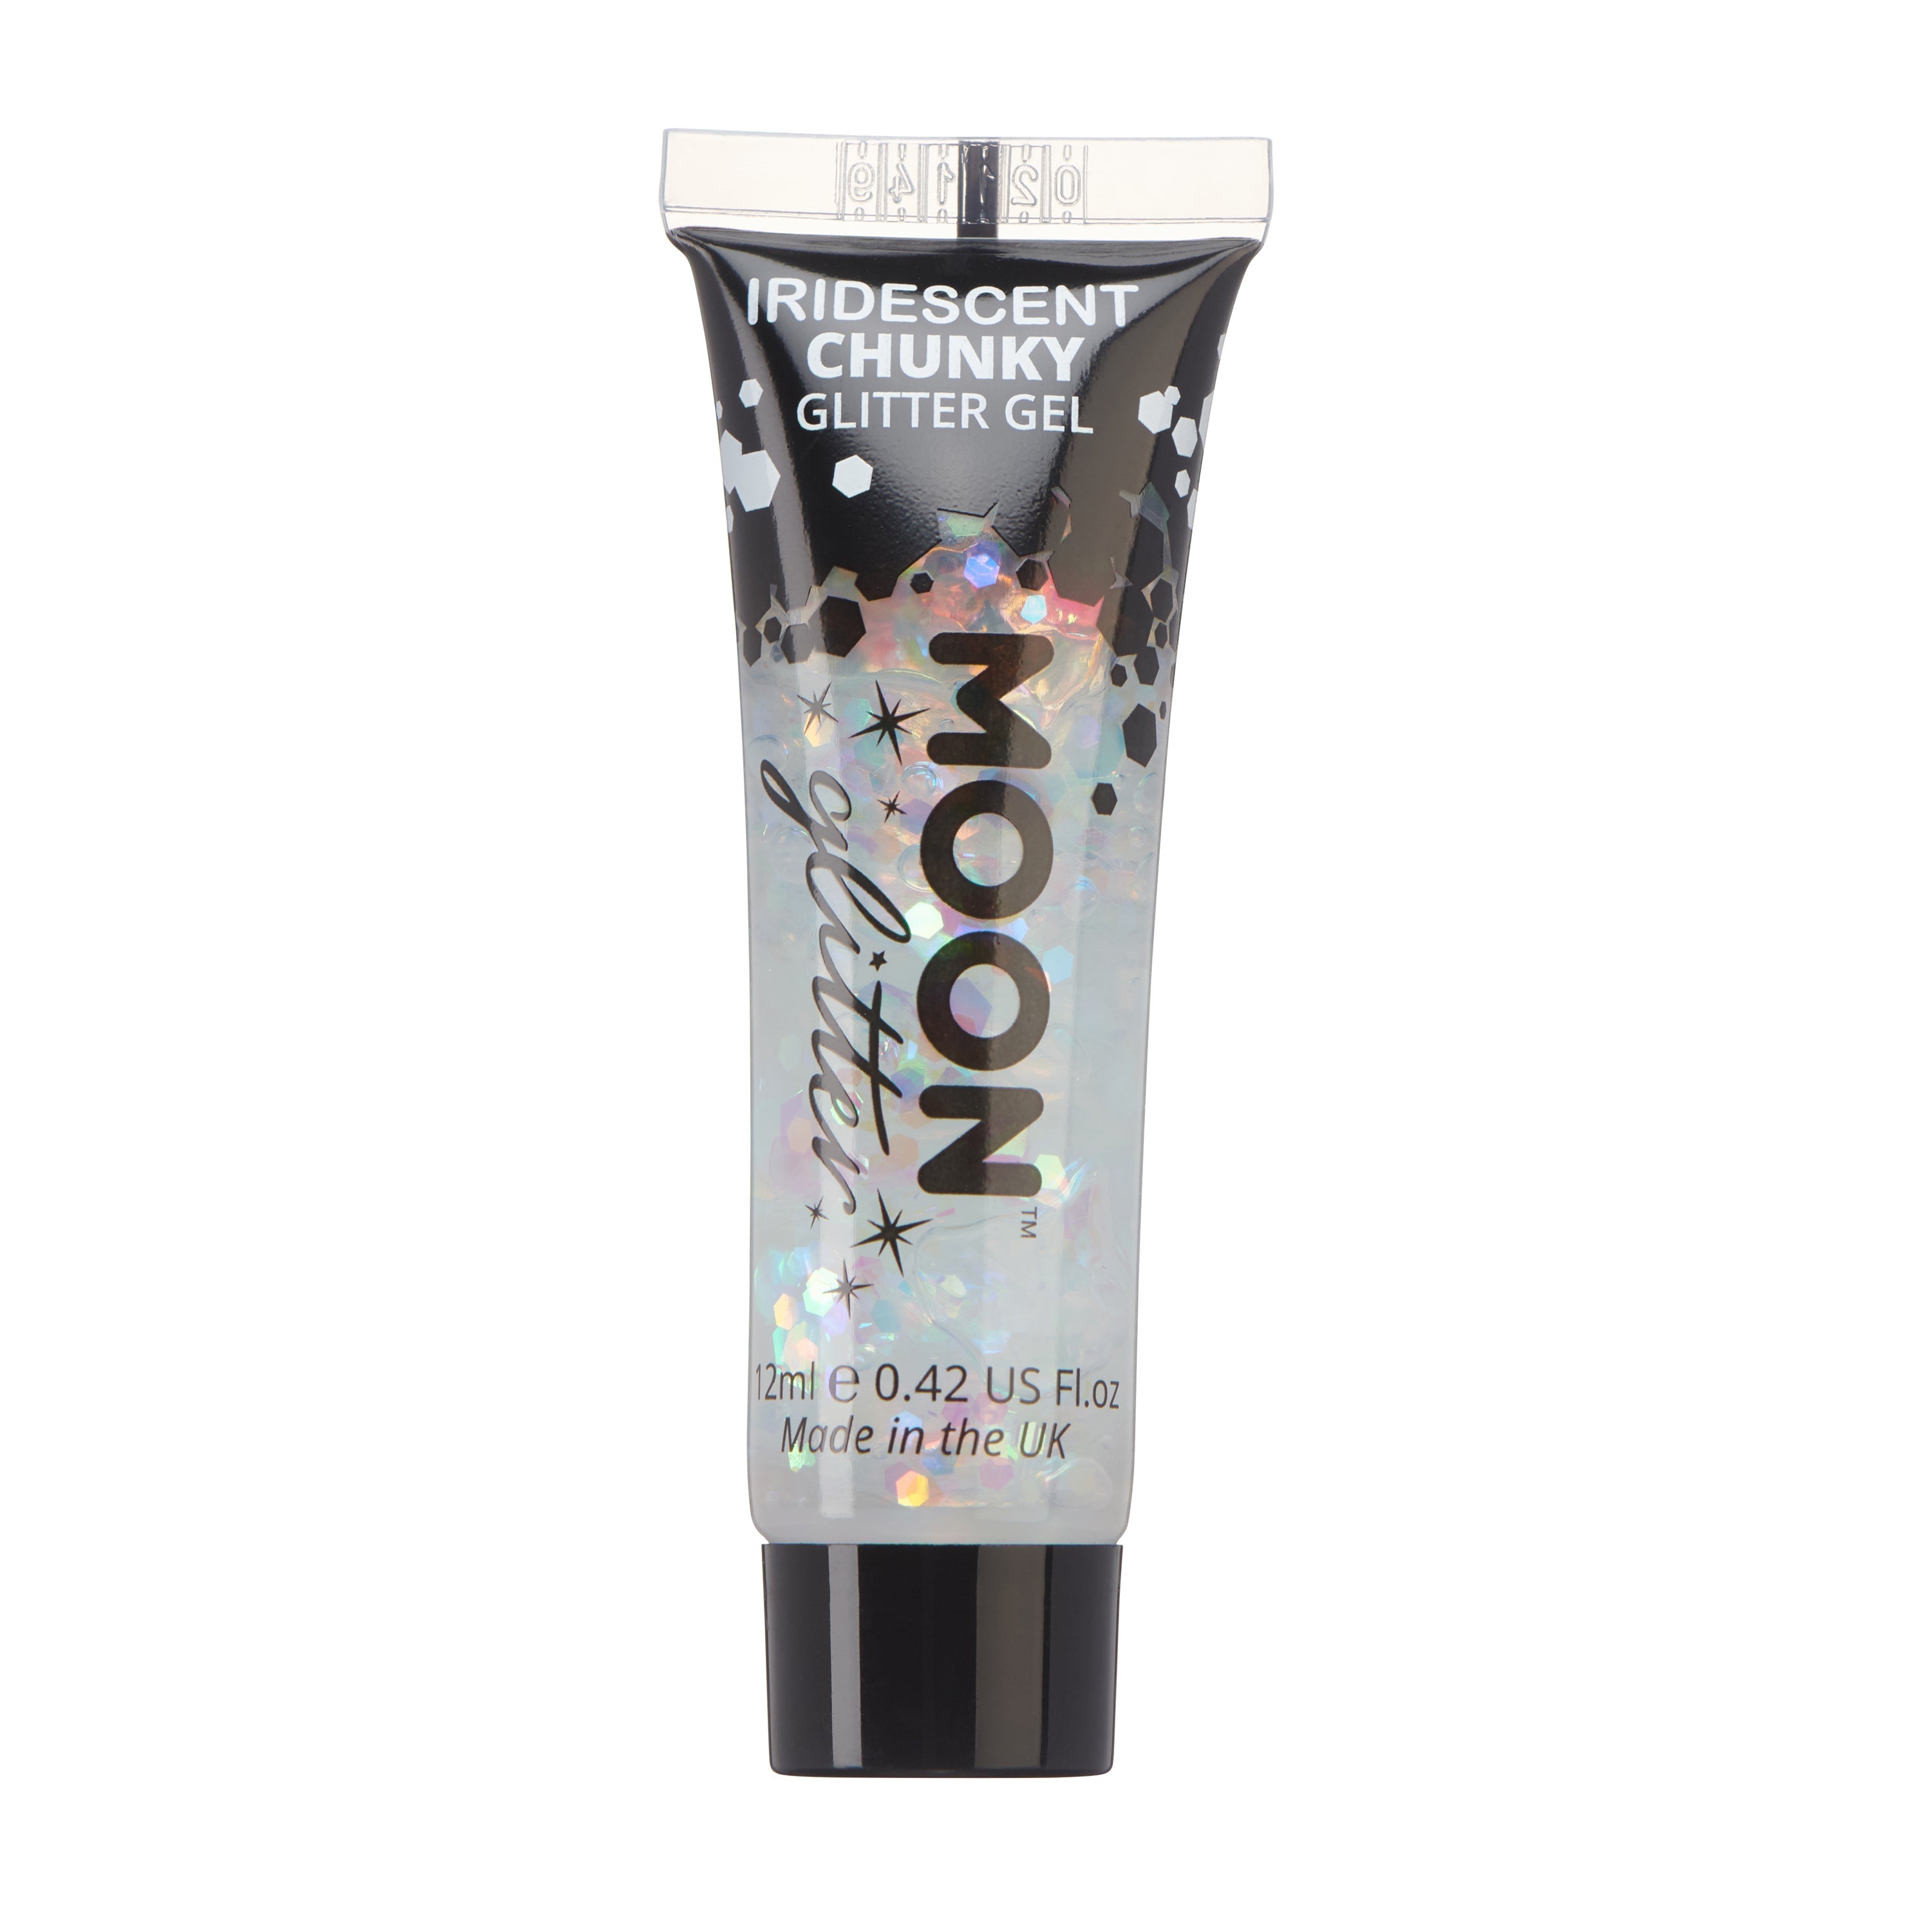 White - Iridescent Chunky Face & Body Glitter Gel, 12mL. Cosmetically certified, FDA & Health Canada compliant, cruelty free and vegan.